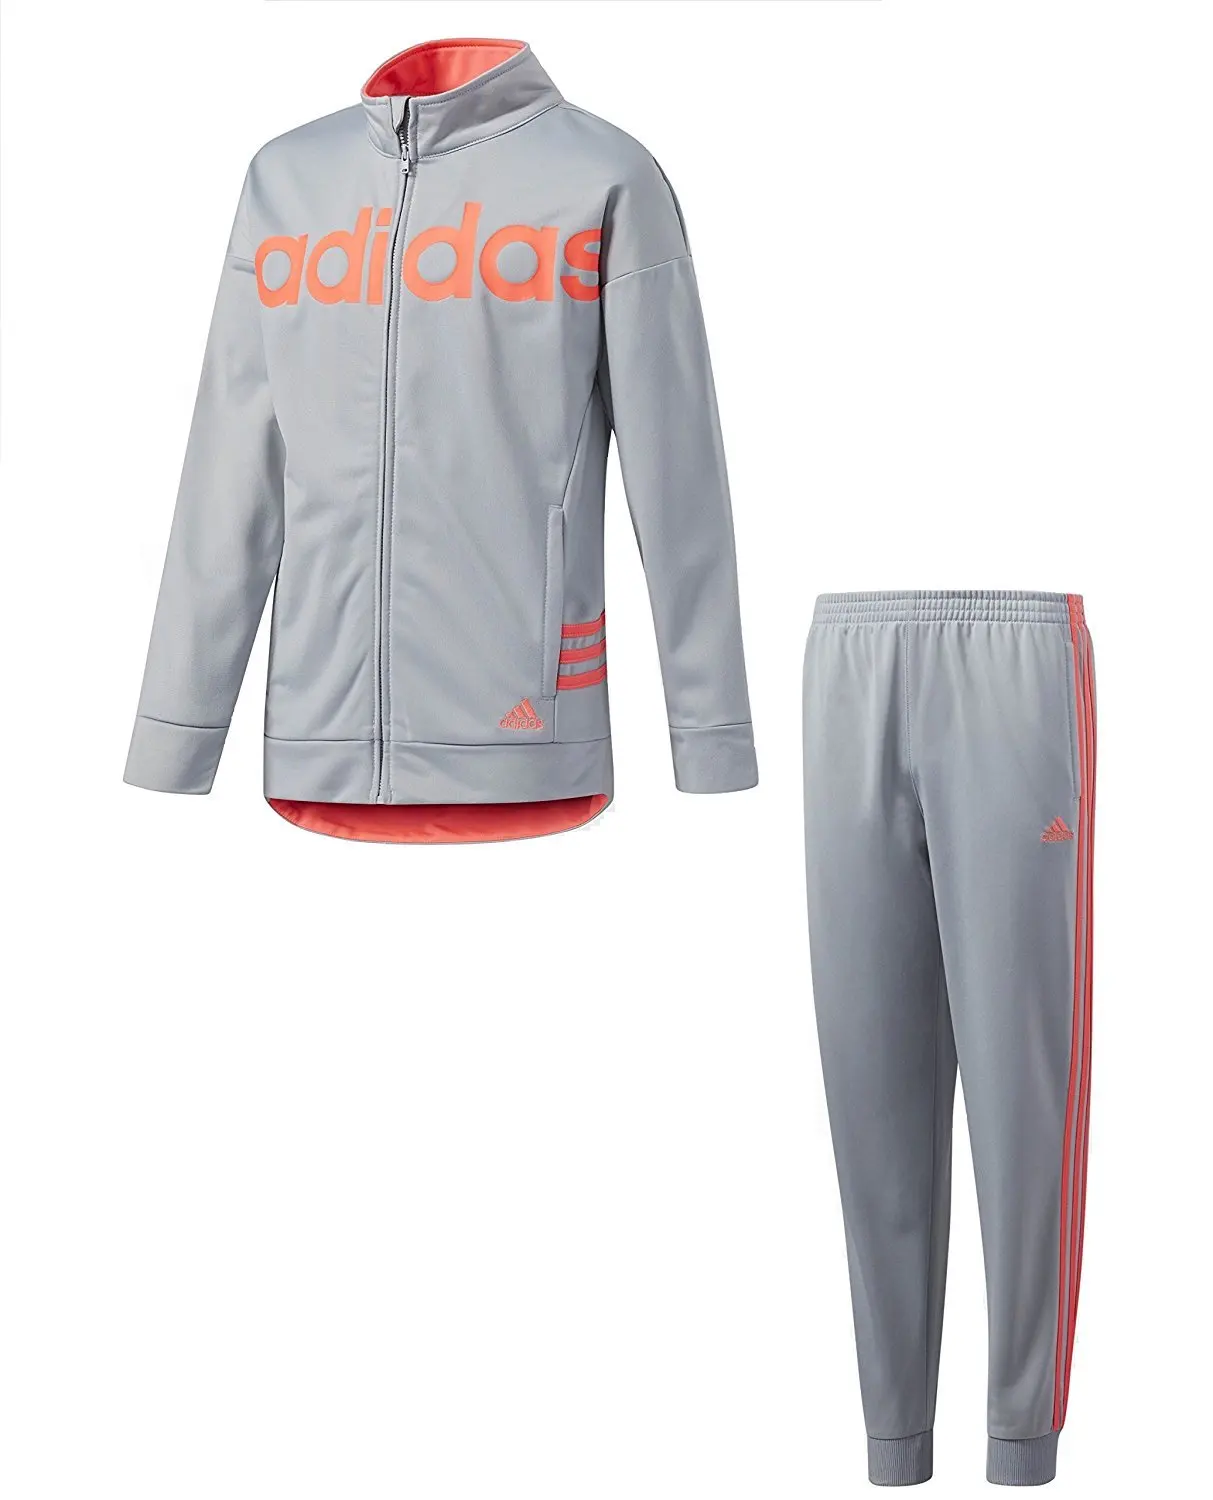 Buy adidas Girls Tricot Zip Jacket and 